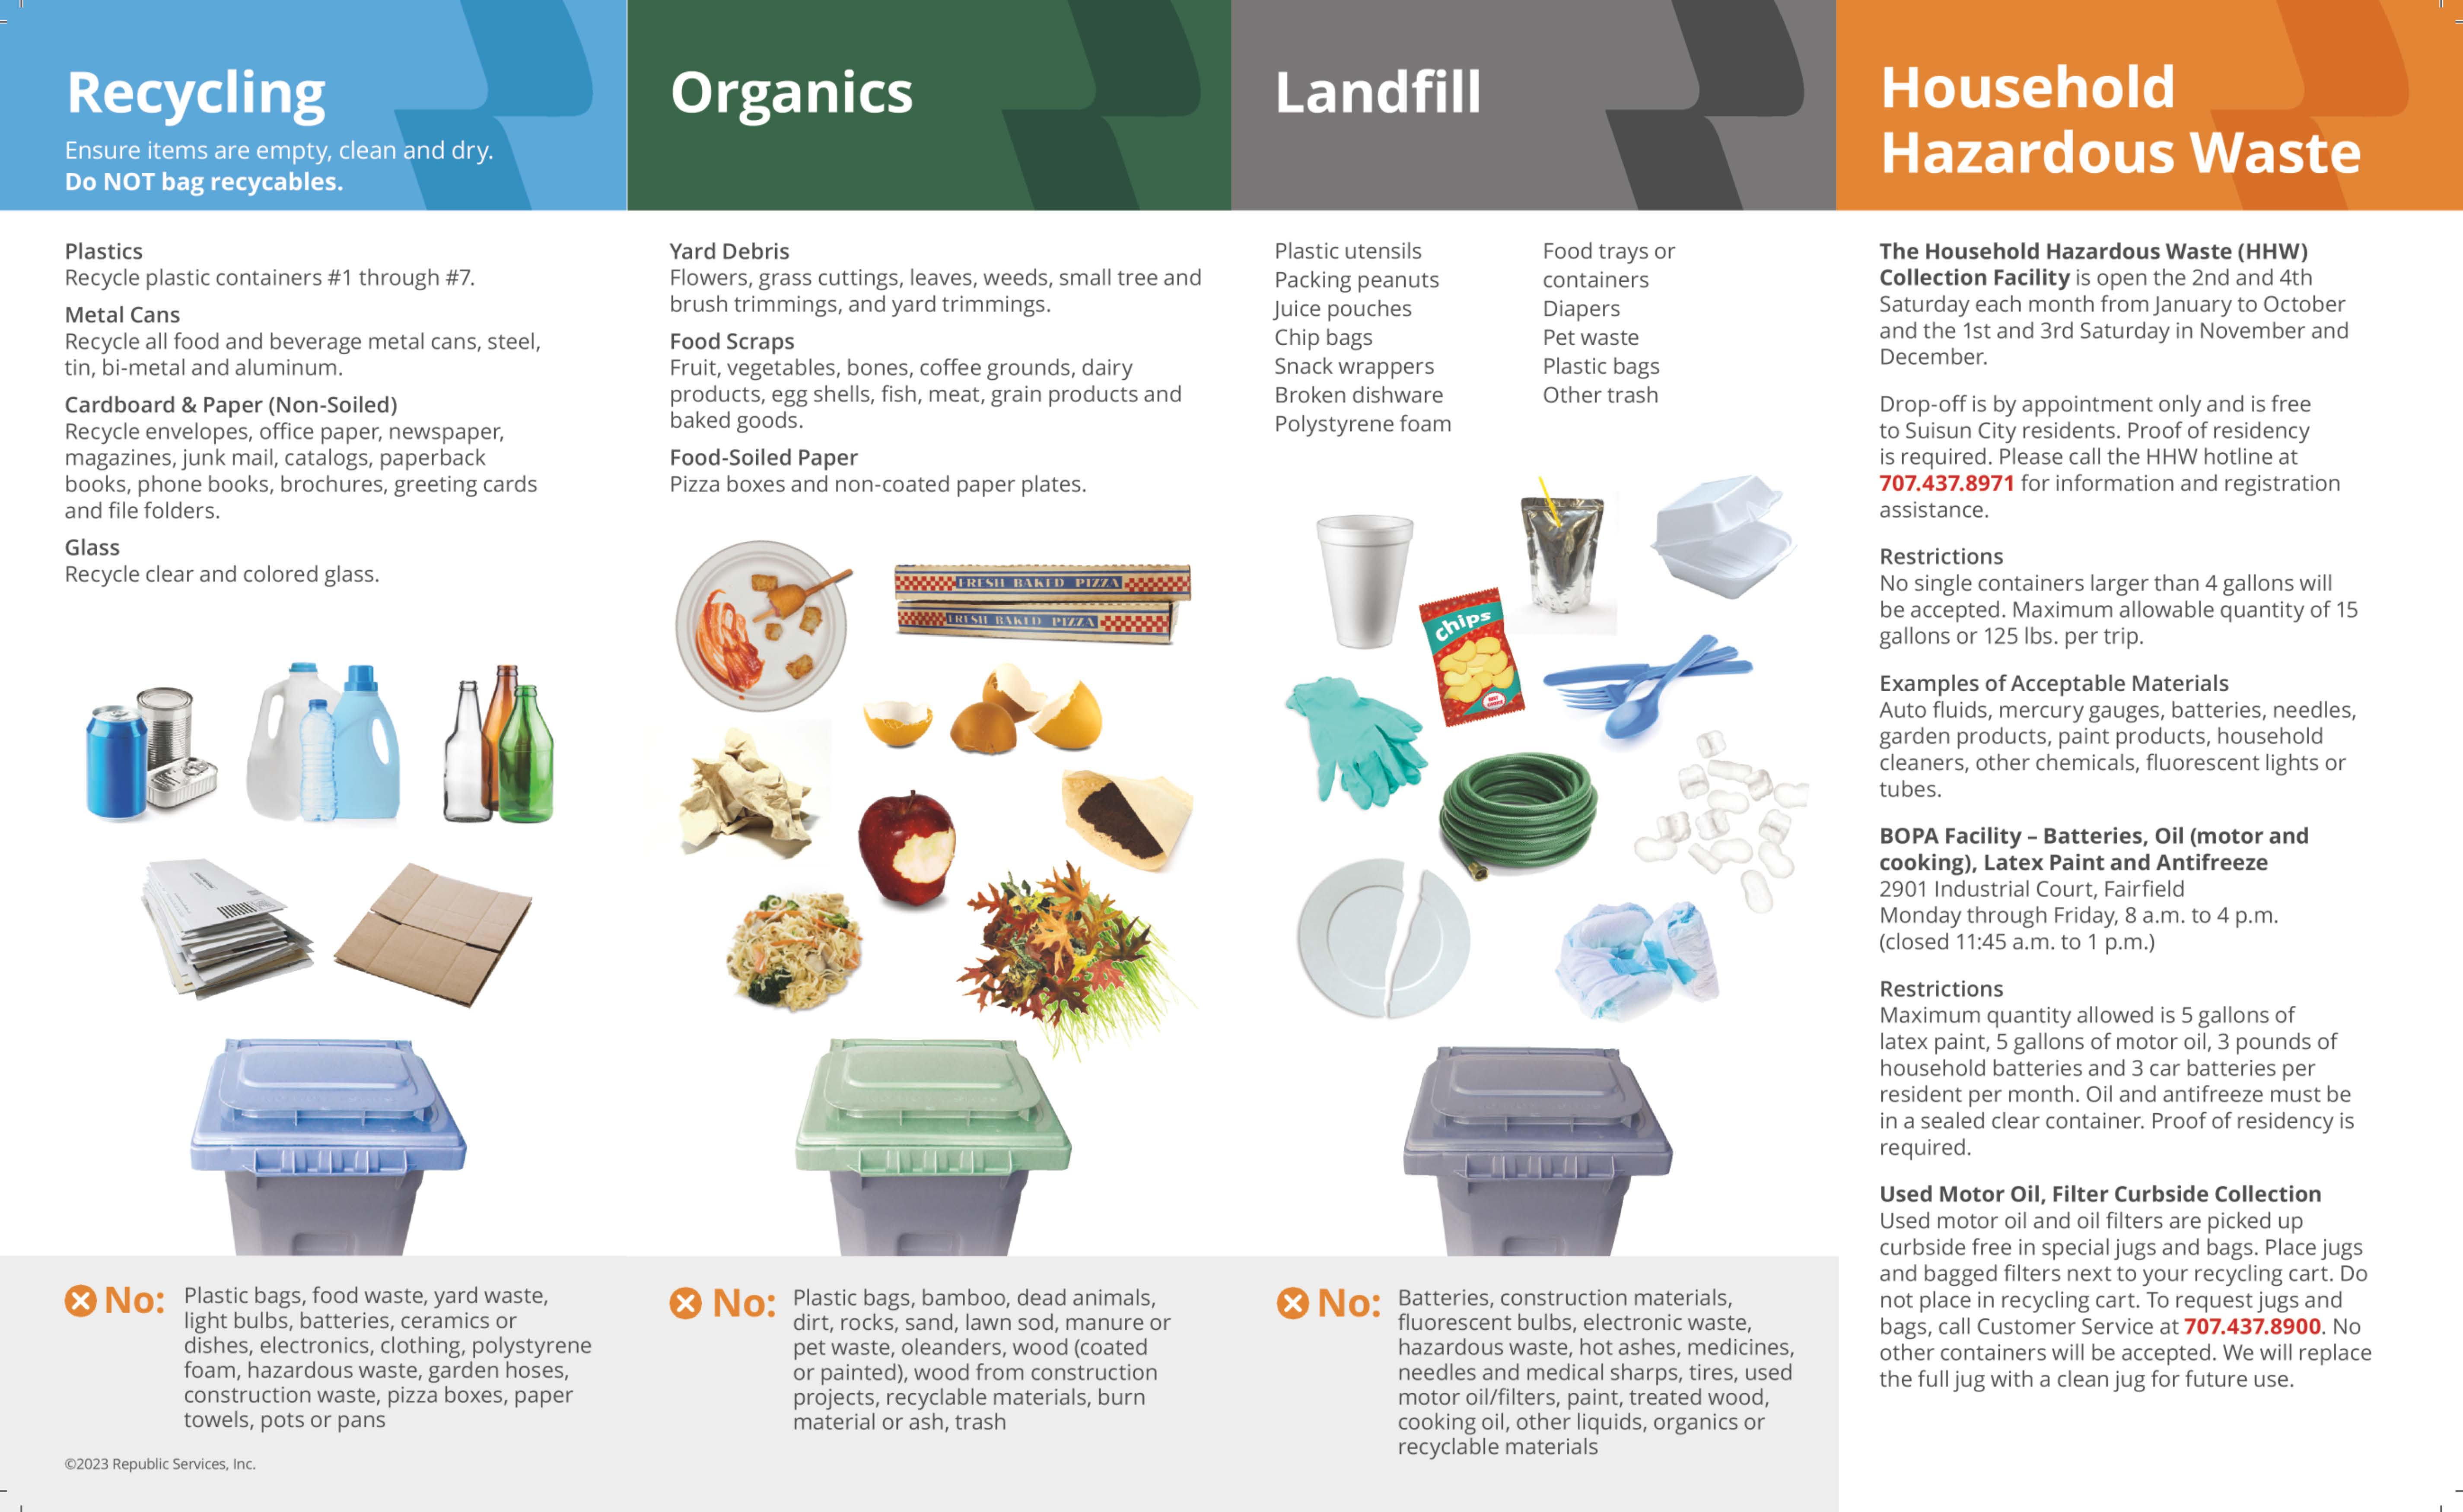 Cheat Sheet for Hazardous Waste Cleanup Operations